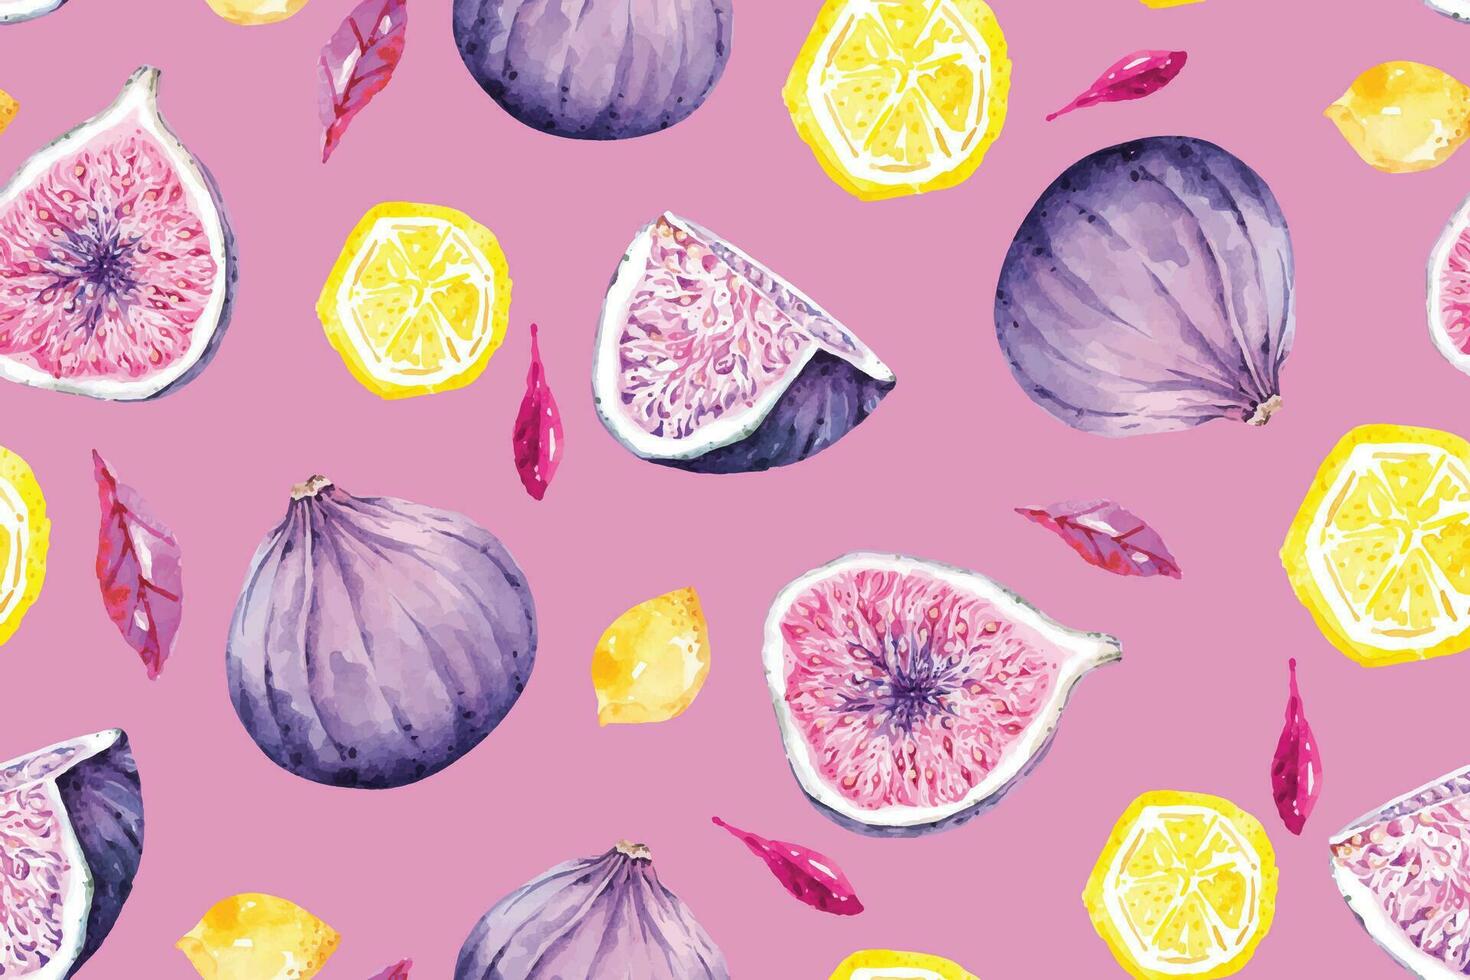 Seamless pattern of figs and lemon with watercolor.Fruit background.Suitable for designing fabric patterns or wallpaper, gift wrapping paper. vector